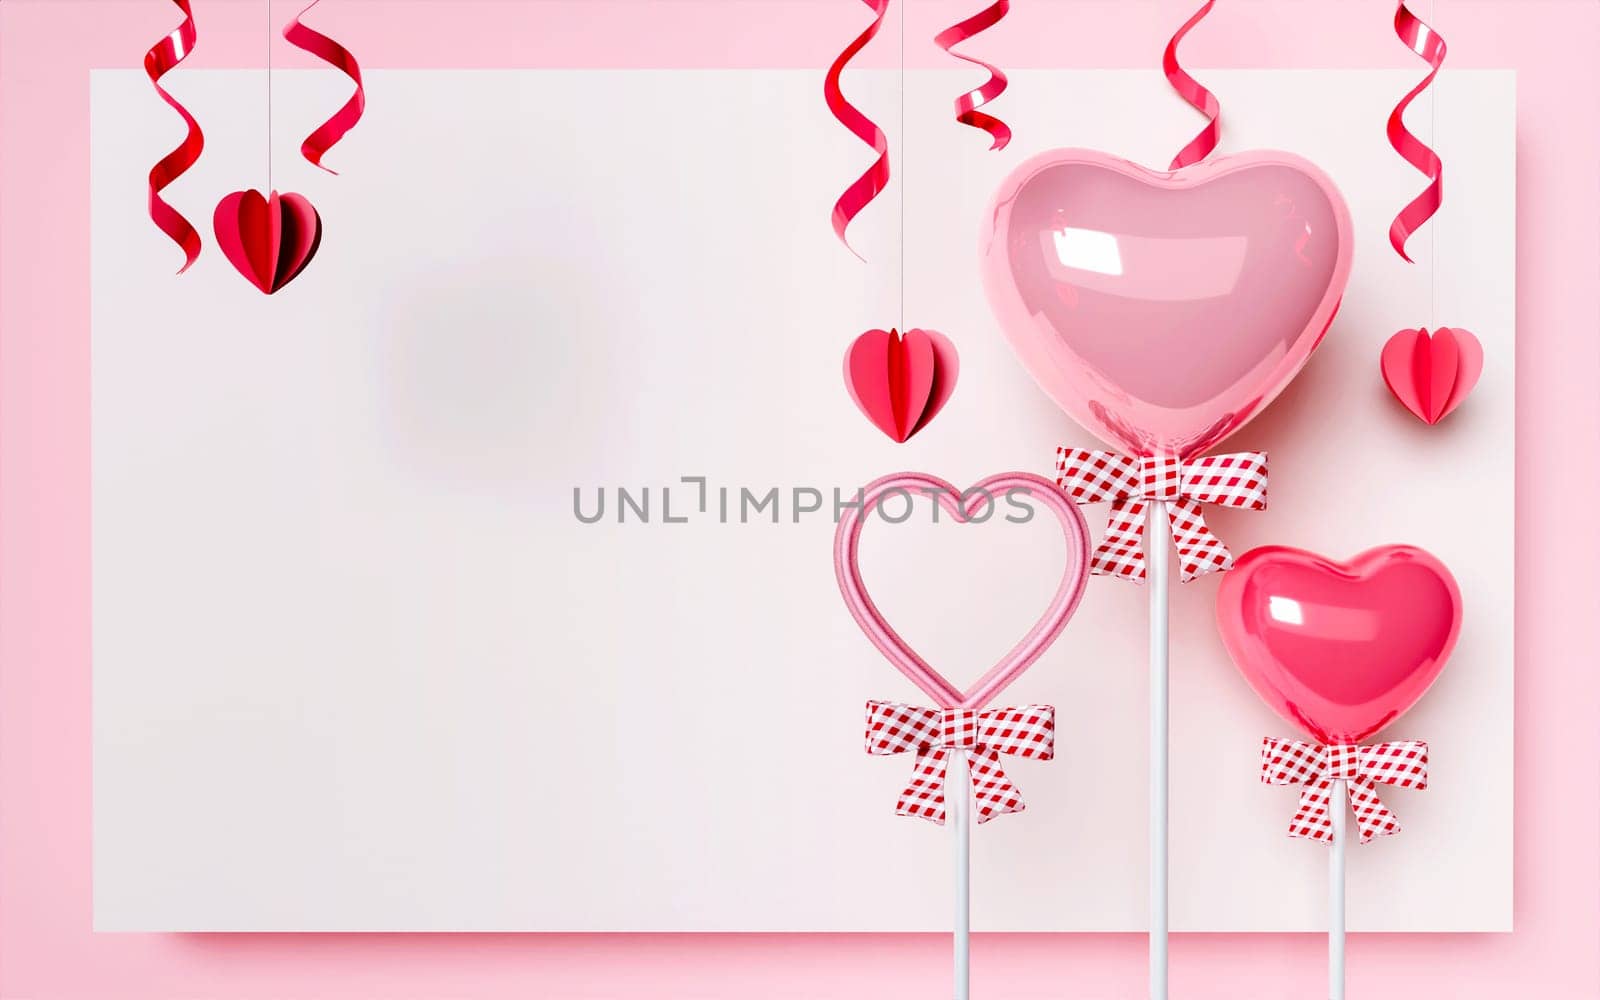 Happy Valentines day background with heart shape balloon, copy space with blank paper, 3D rendering illustration by meepiangraphic